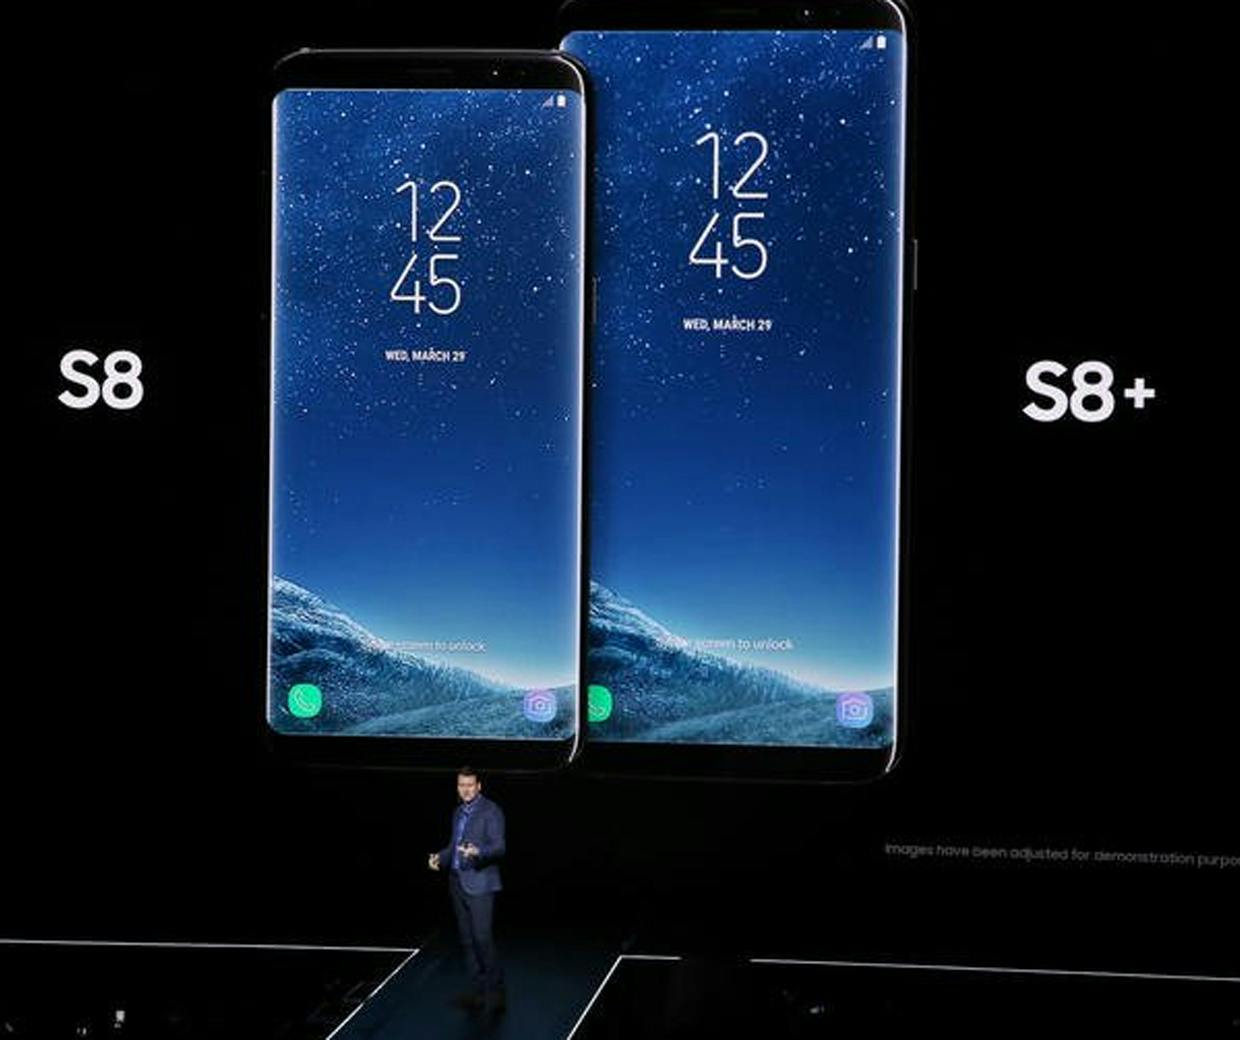 Samsung S Flashy Galaxy S8 Impresses But The Brand Isn T Out Of The Woods Yet